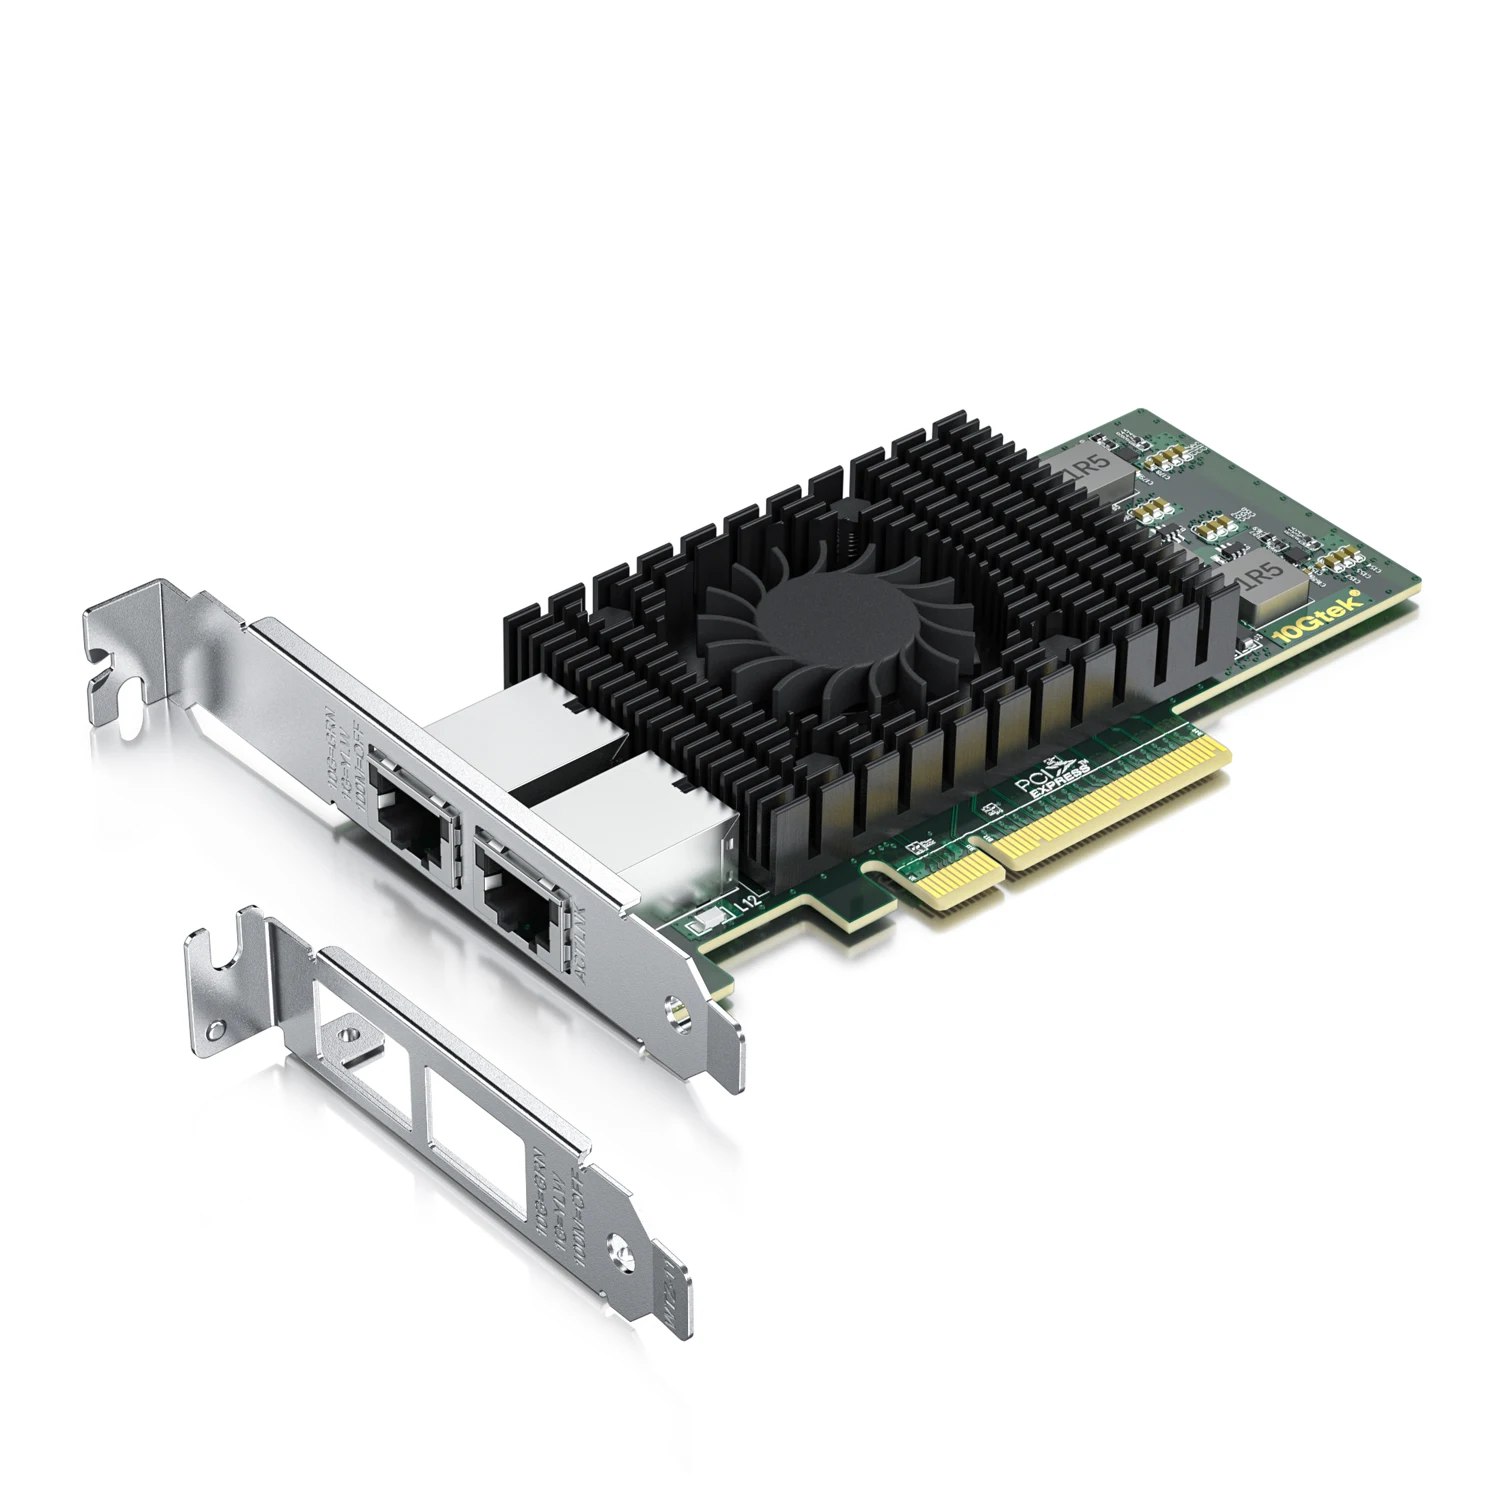 10Gb PCI-E NIC Network Card, PCI Express Ethernet LAN Adapter Support Windows Server/Windows/Linux/ESX, Compare to Intel X540-T2 10gb pci e nic network card pci express ethernet lan adapter support windows server windows linux esx compare to intel x540 t2